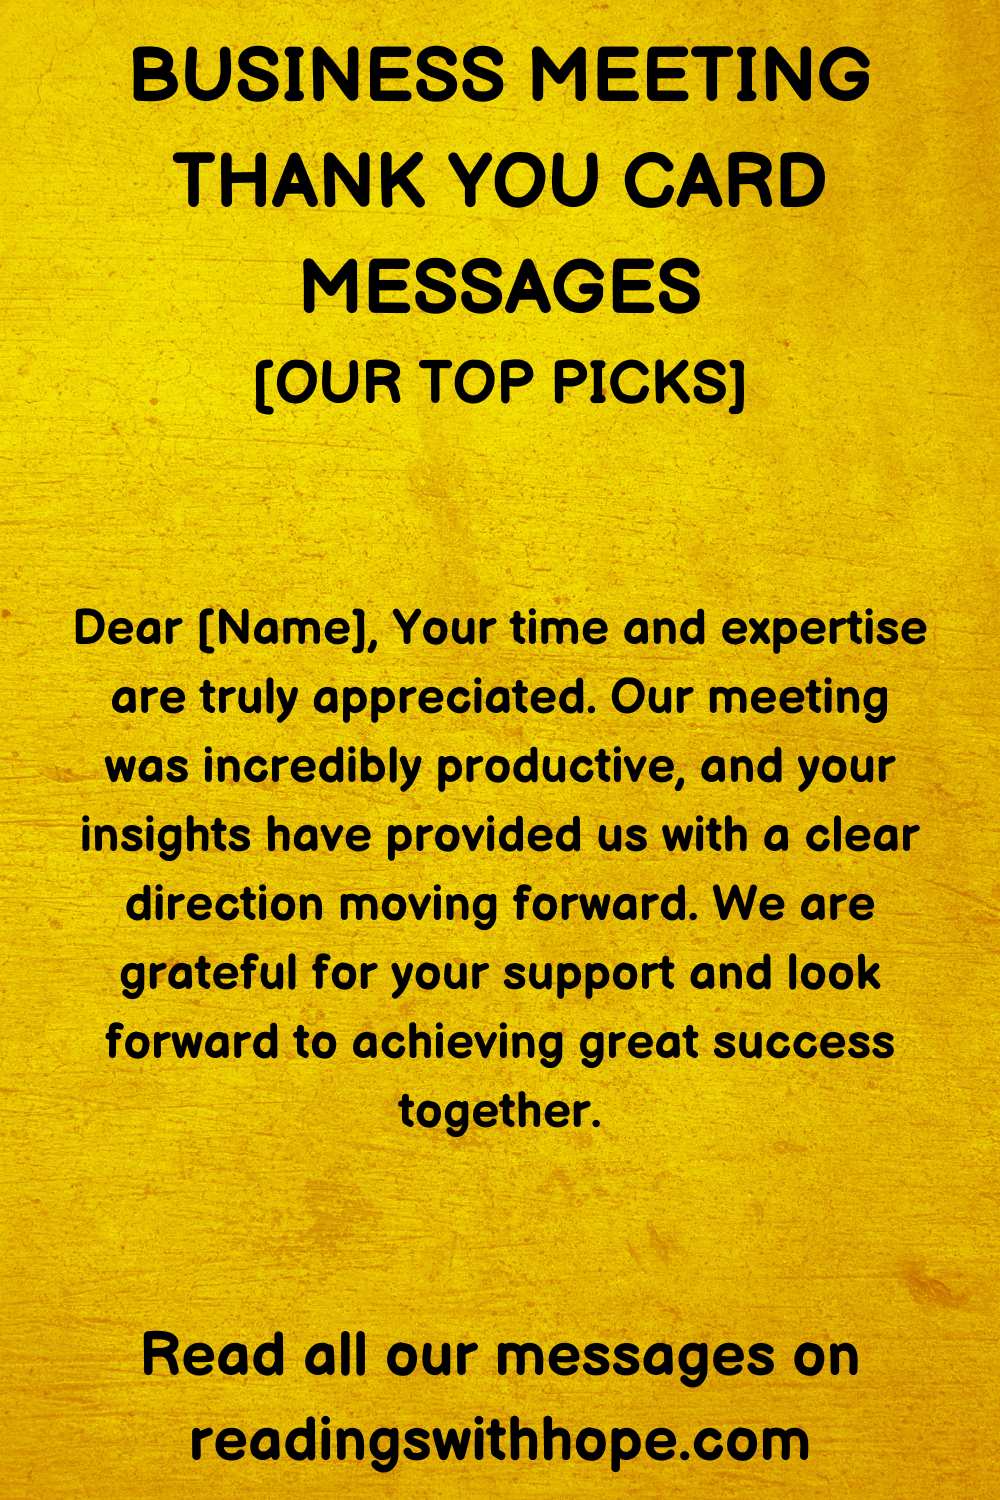 Business Meeting Thank You Card Messages
